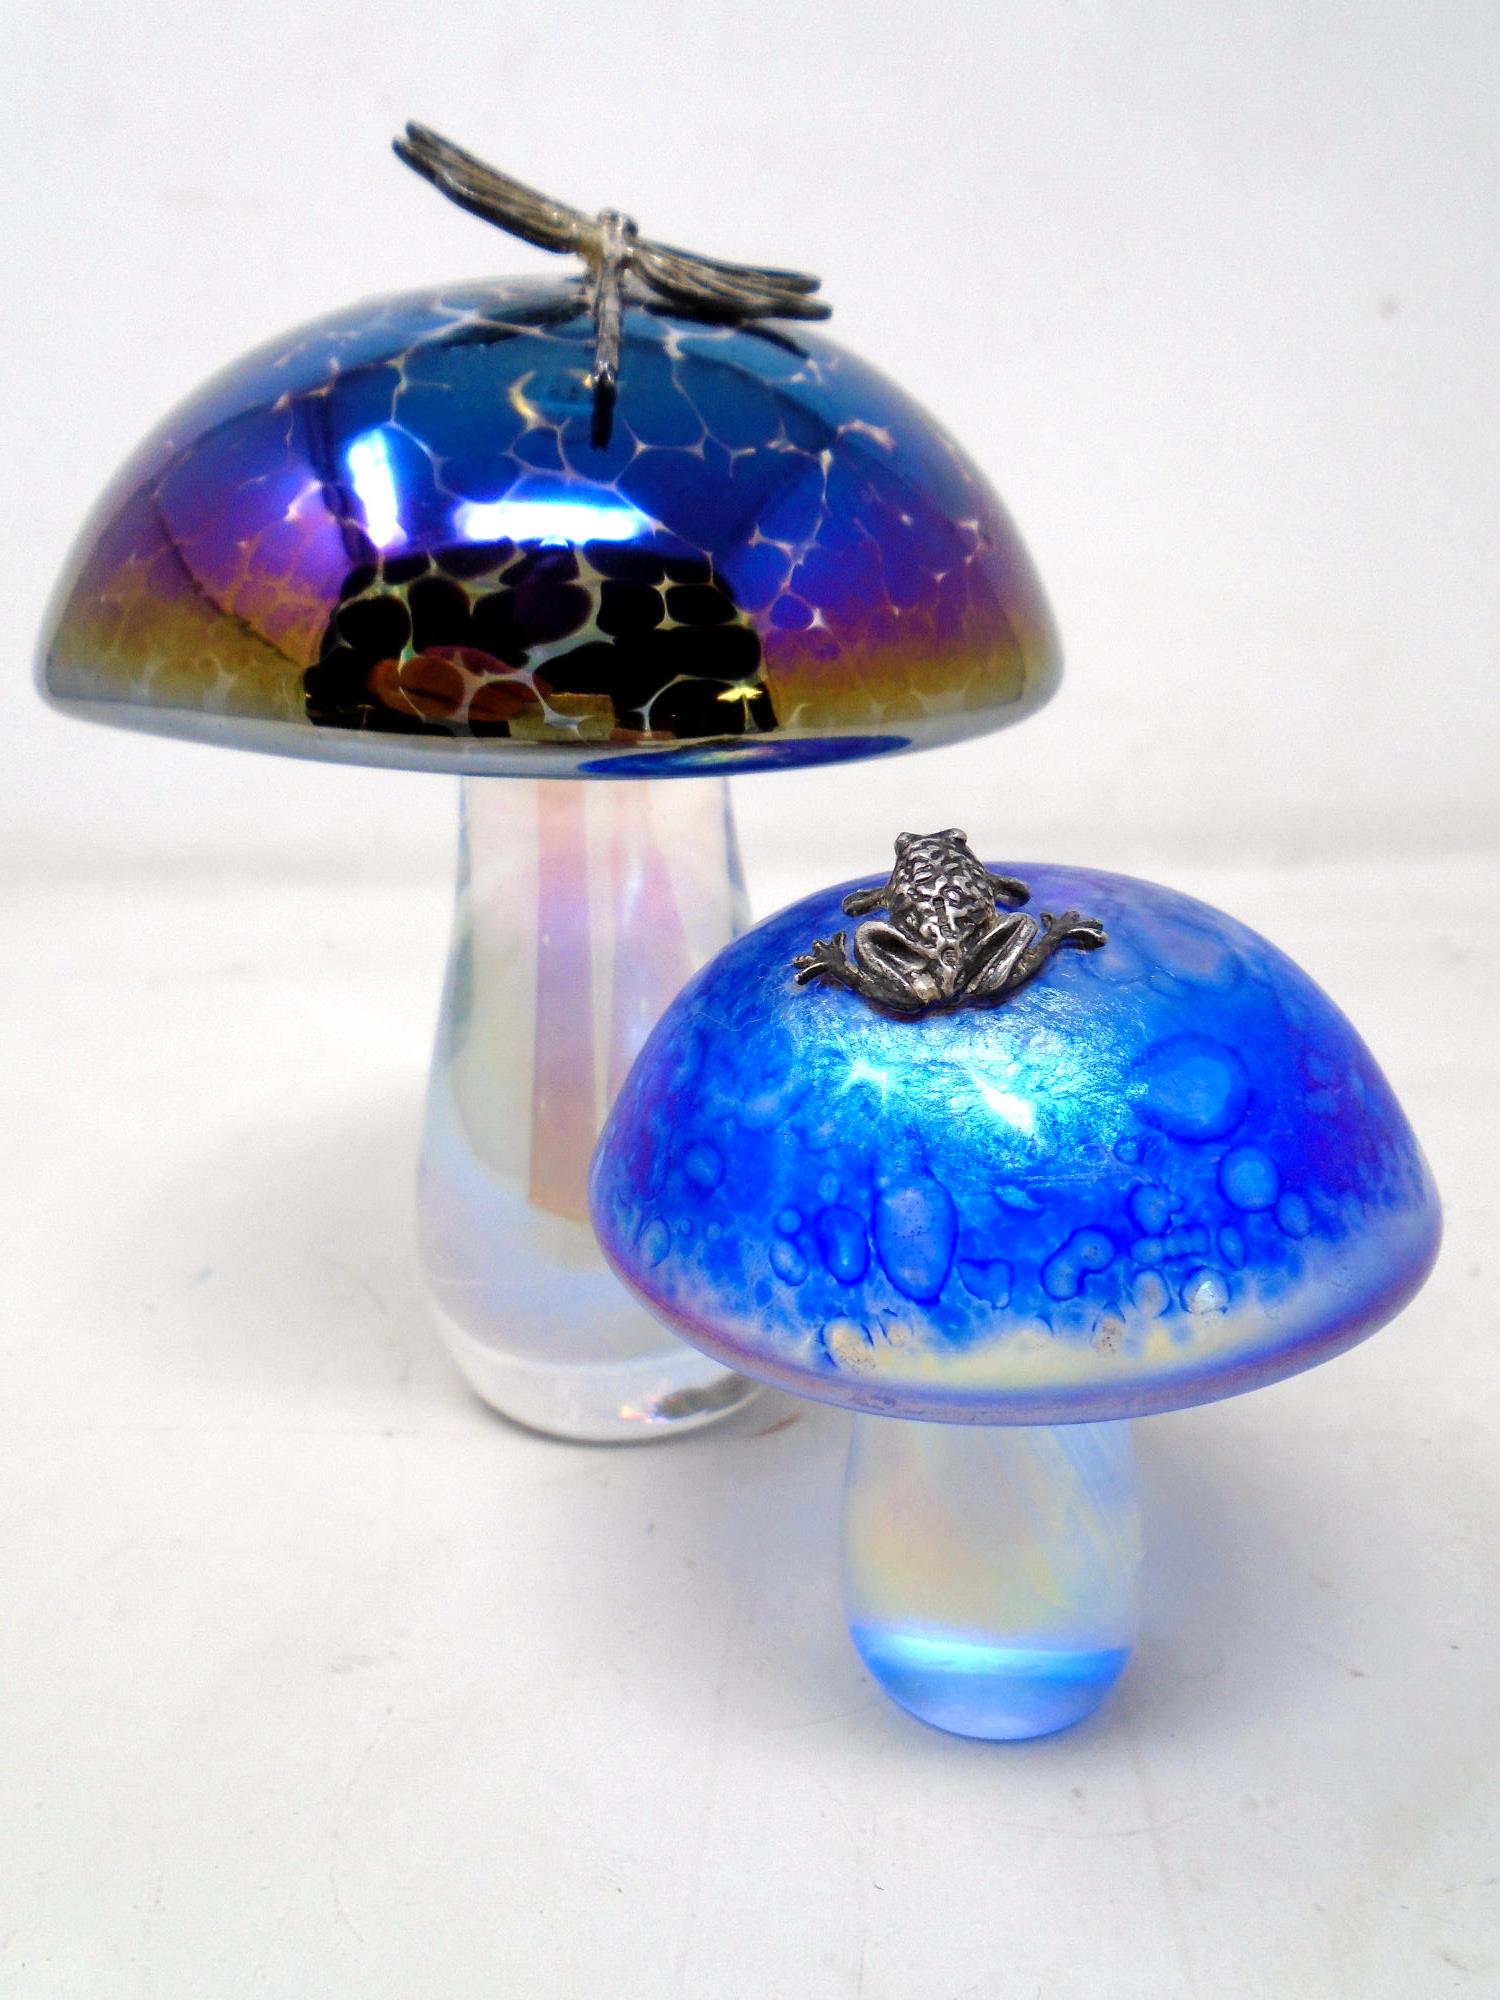 A John Ditchfield Glasform iridescent glass mushroom paperweight with applied silver dragonfly,